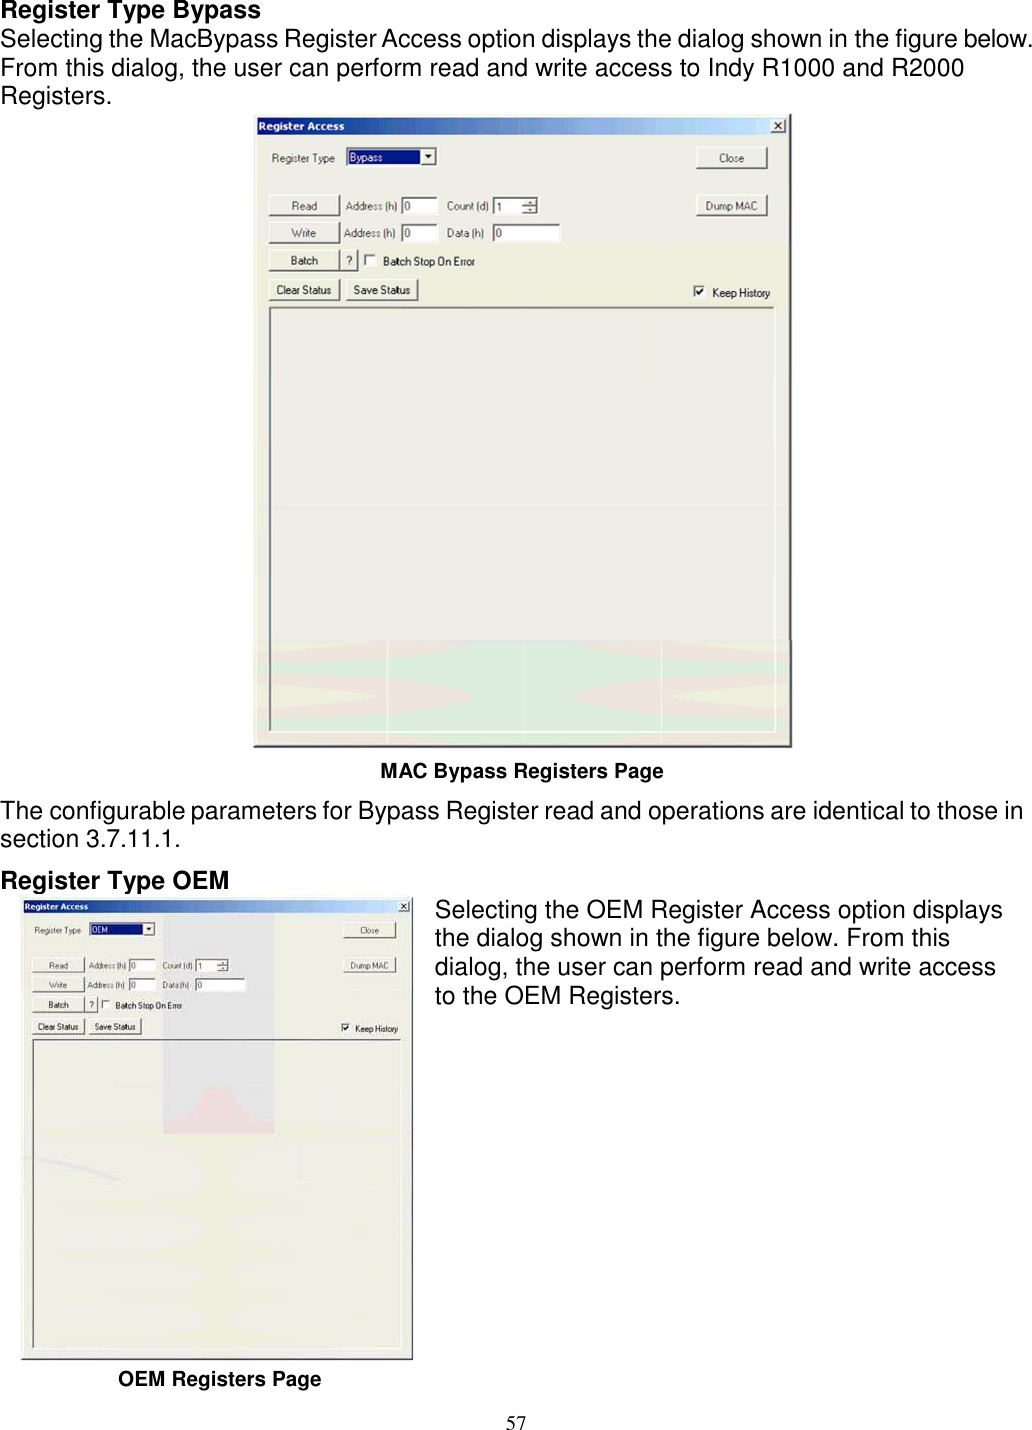 57    Register Type Bypass Selecting the MacBypass Register Access option displays the dialog shown in the figure below. From this dialog, the user can perform read and write access to Indy R1000 and R2000 Registers.  MAC Bypass Registers Page The configurable parameters for Bypass Register read and operations are identical to those in section 3.7.11.1. Register Type OEM  OEM Registers Page Selecting the OEM Register Access option displays the dialog shown in the figure below. From this dialog, the user can perform read and write access to the OEM Registers. 